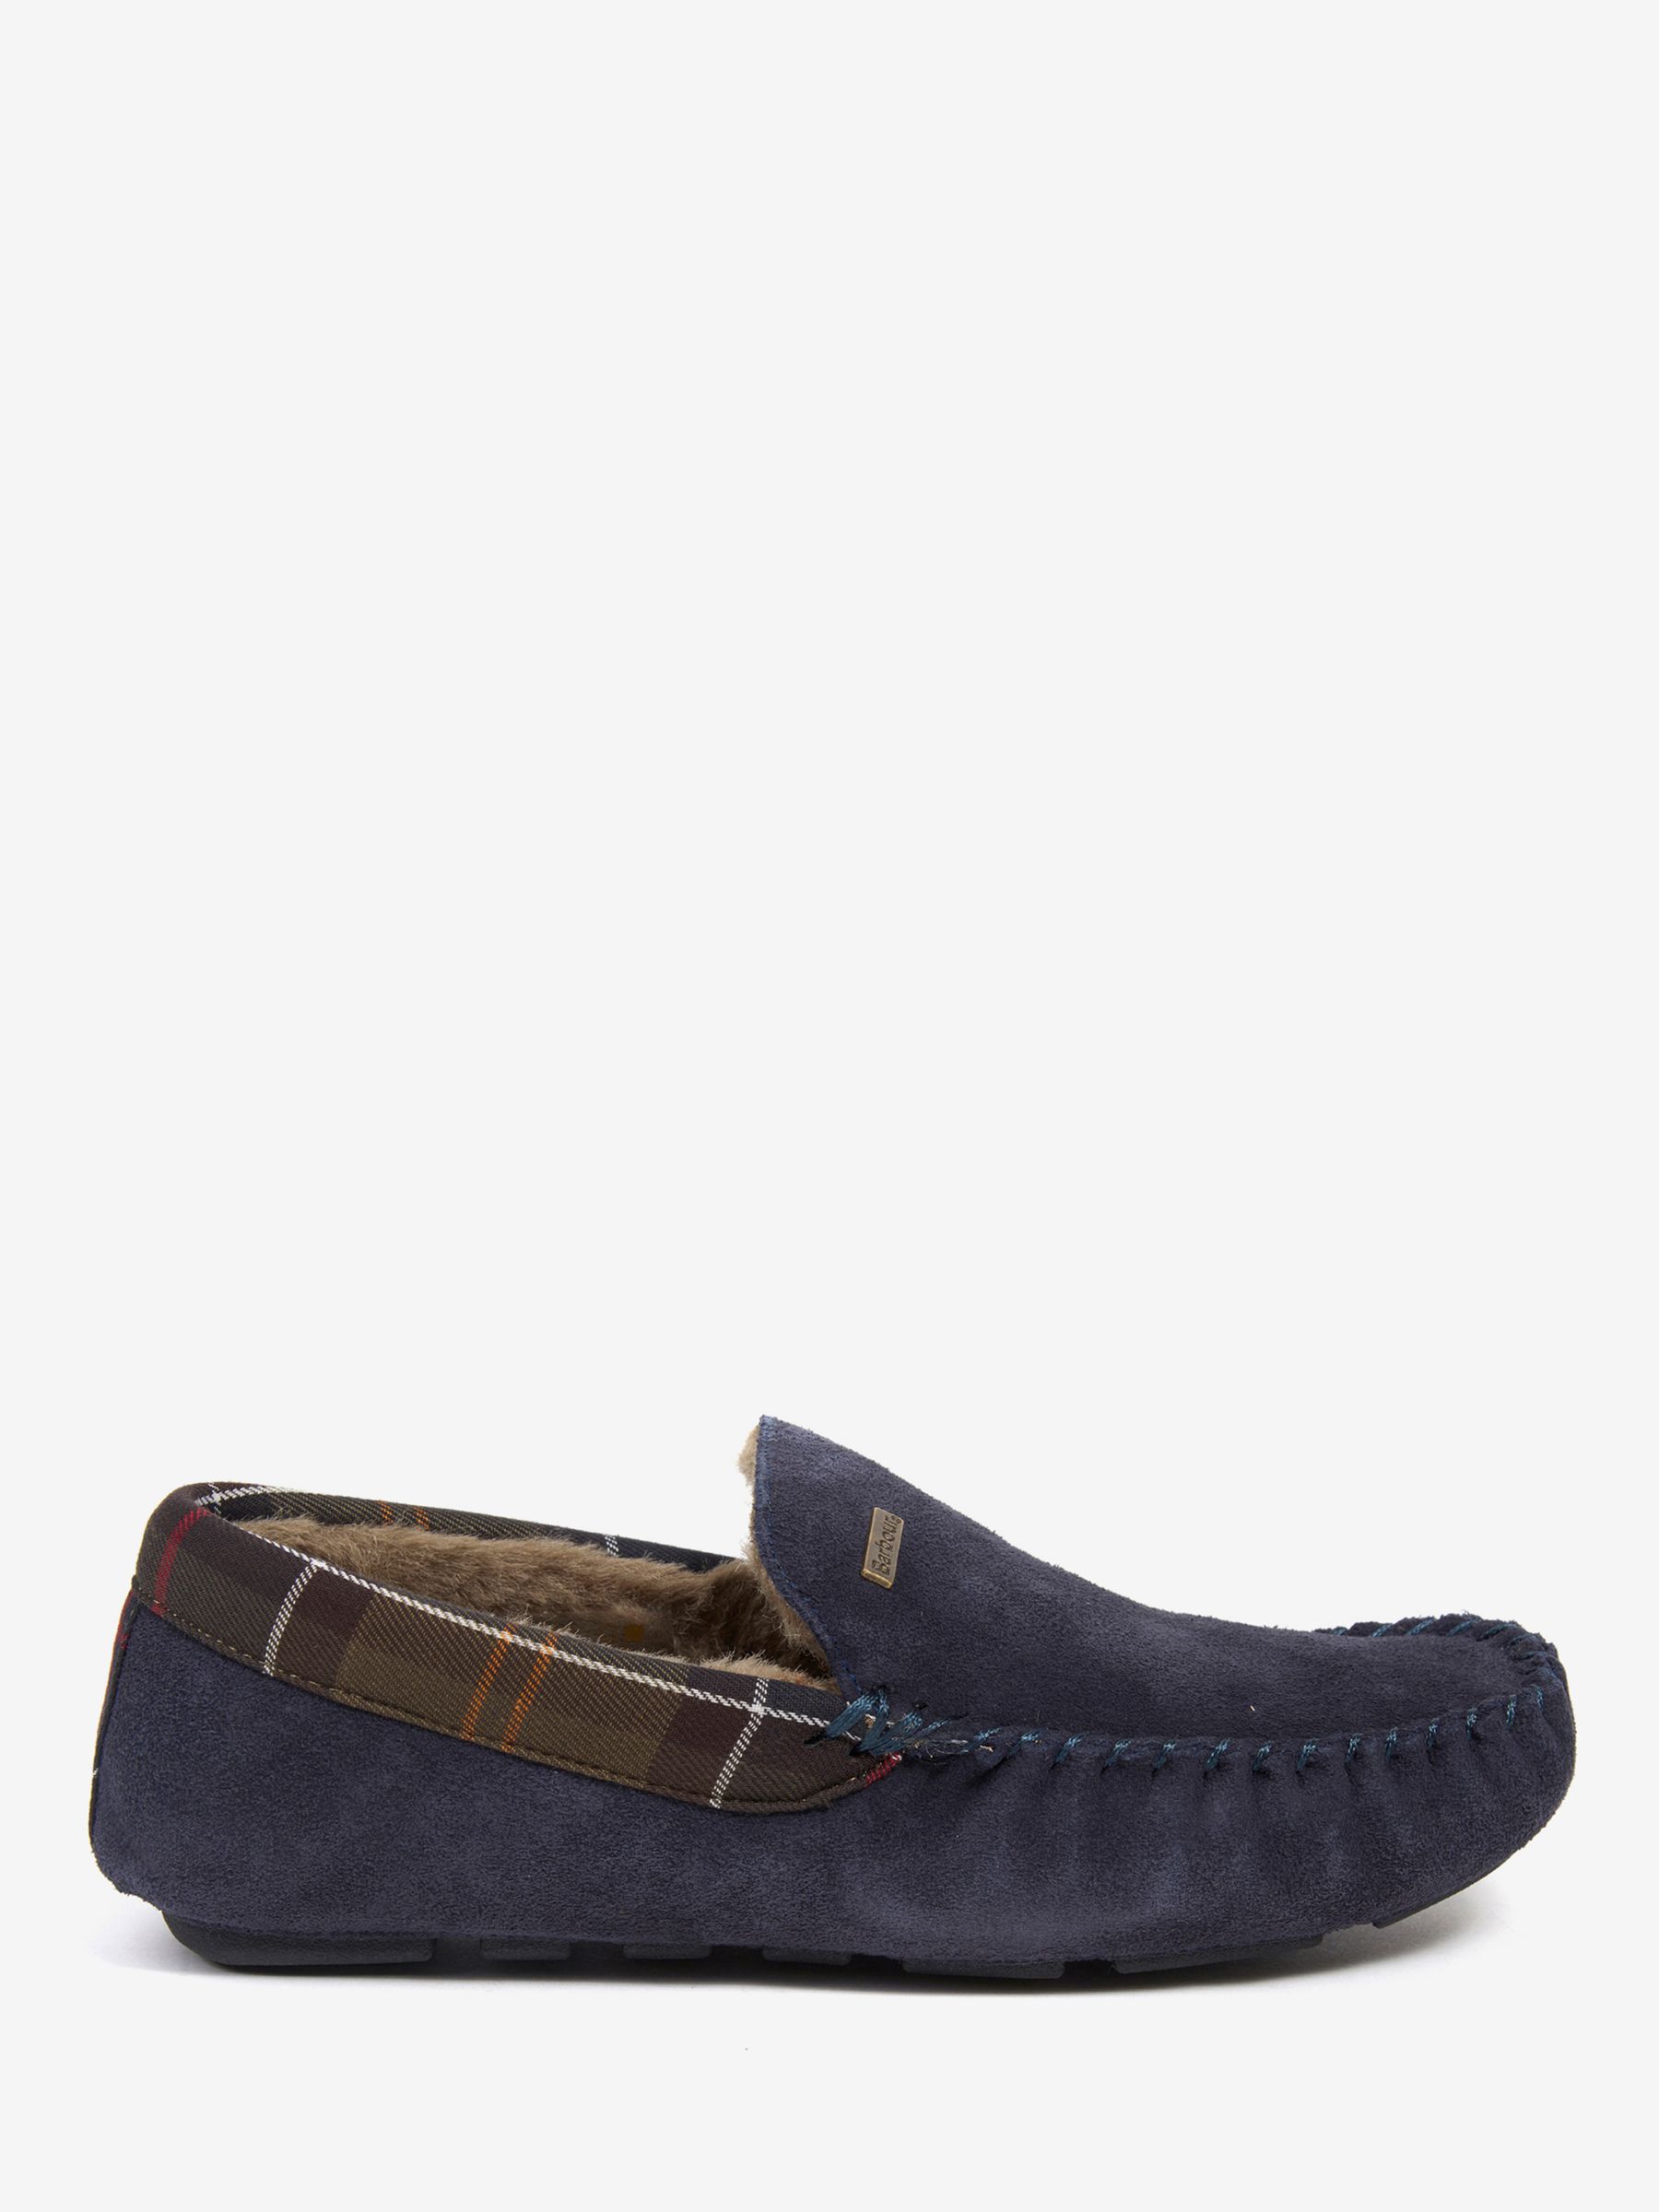 Barbour Monty Suede Slippers, Navy at John Lewis & Partners